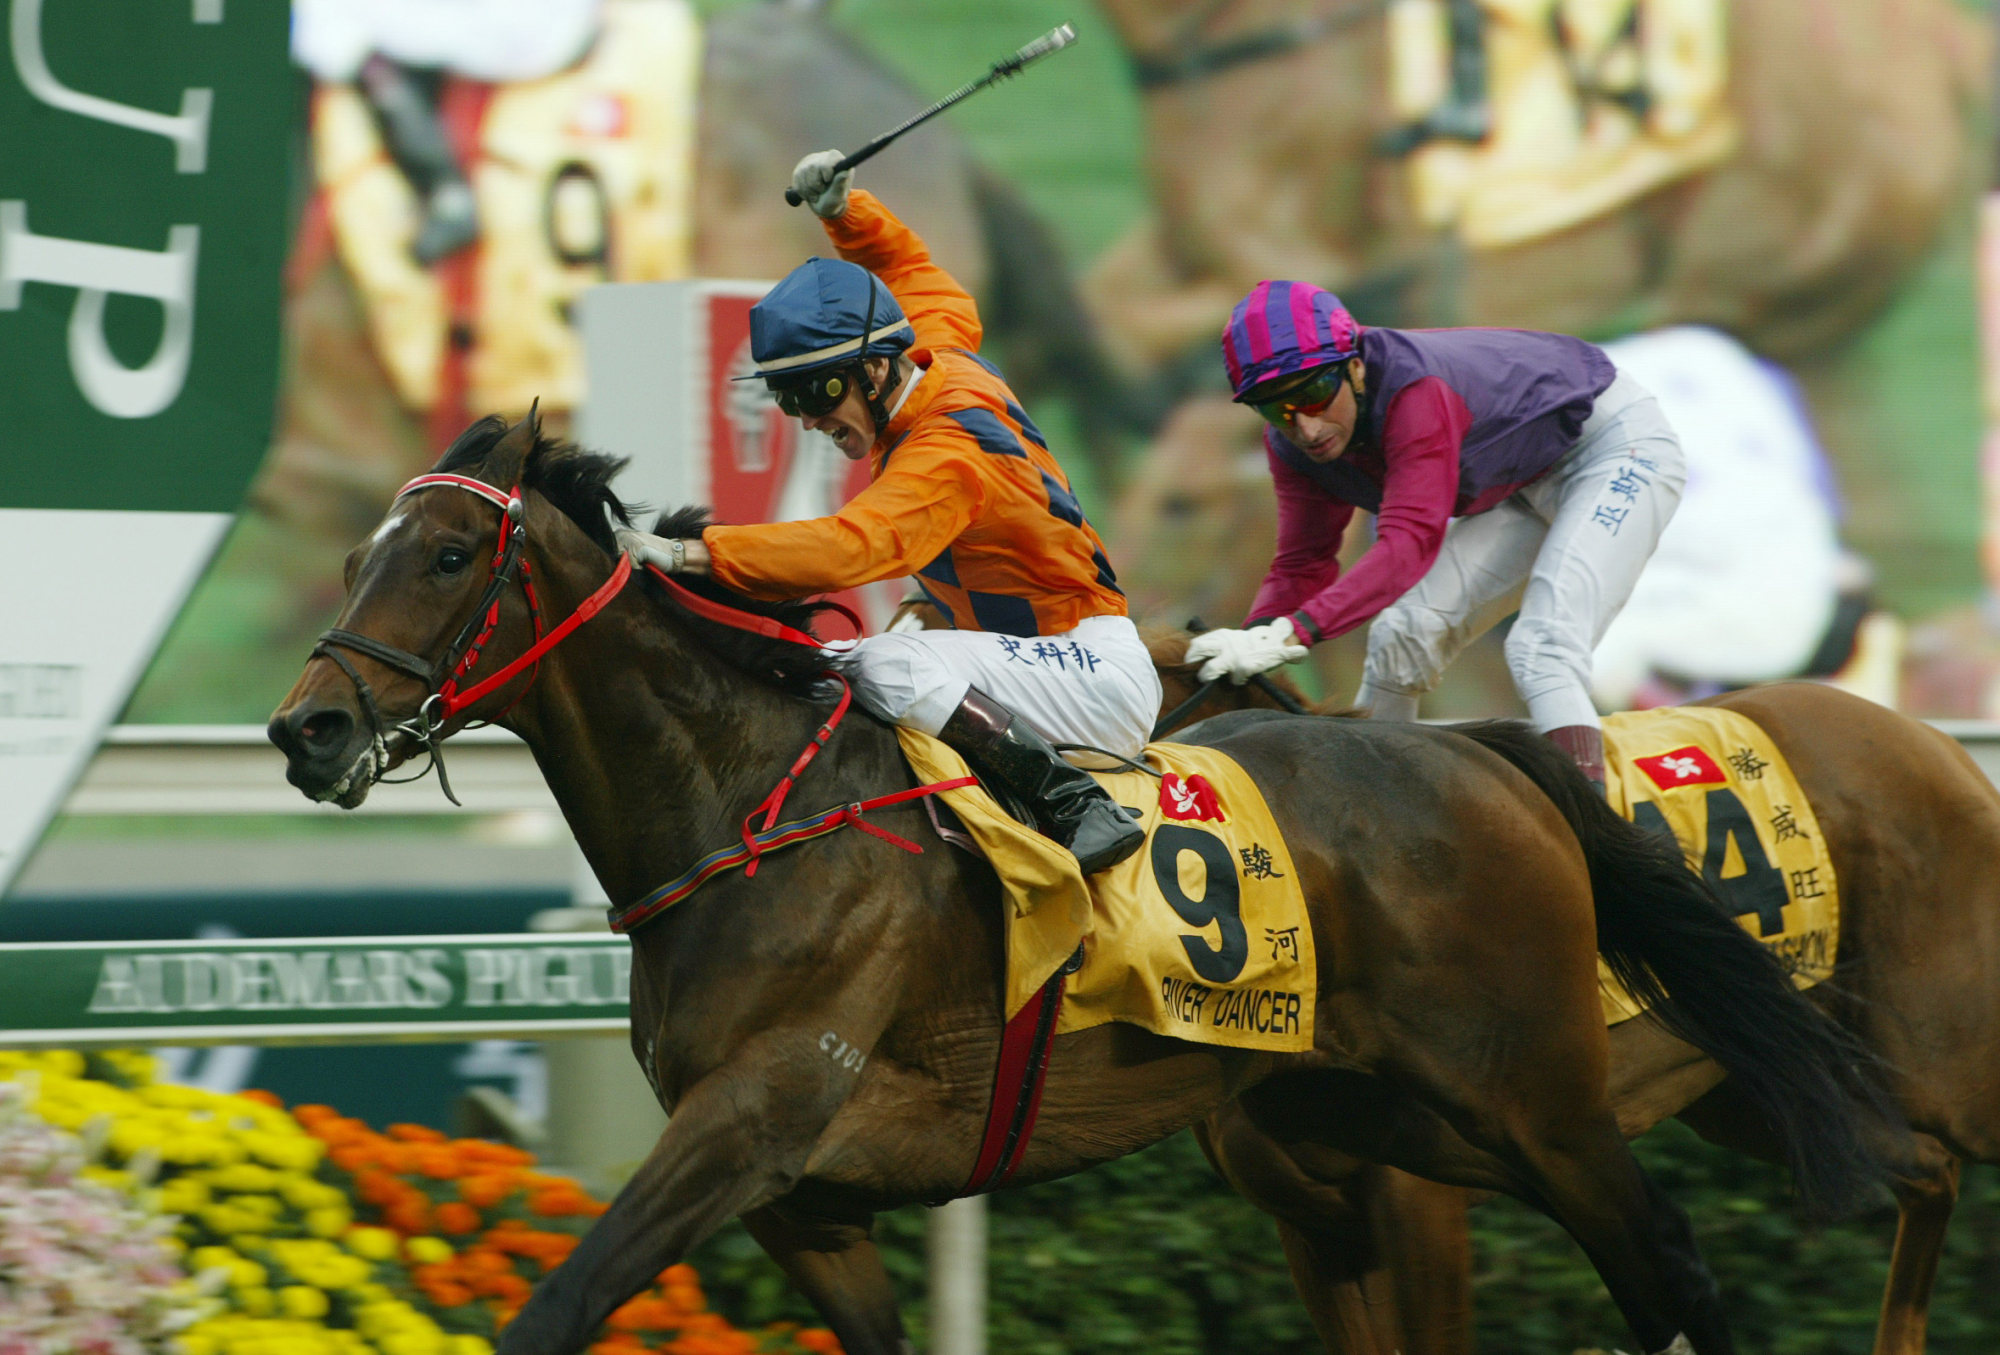 Glyn Schofield wins the 2004 QE II Cup on River Dancer. 